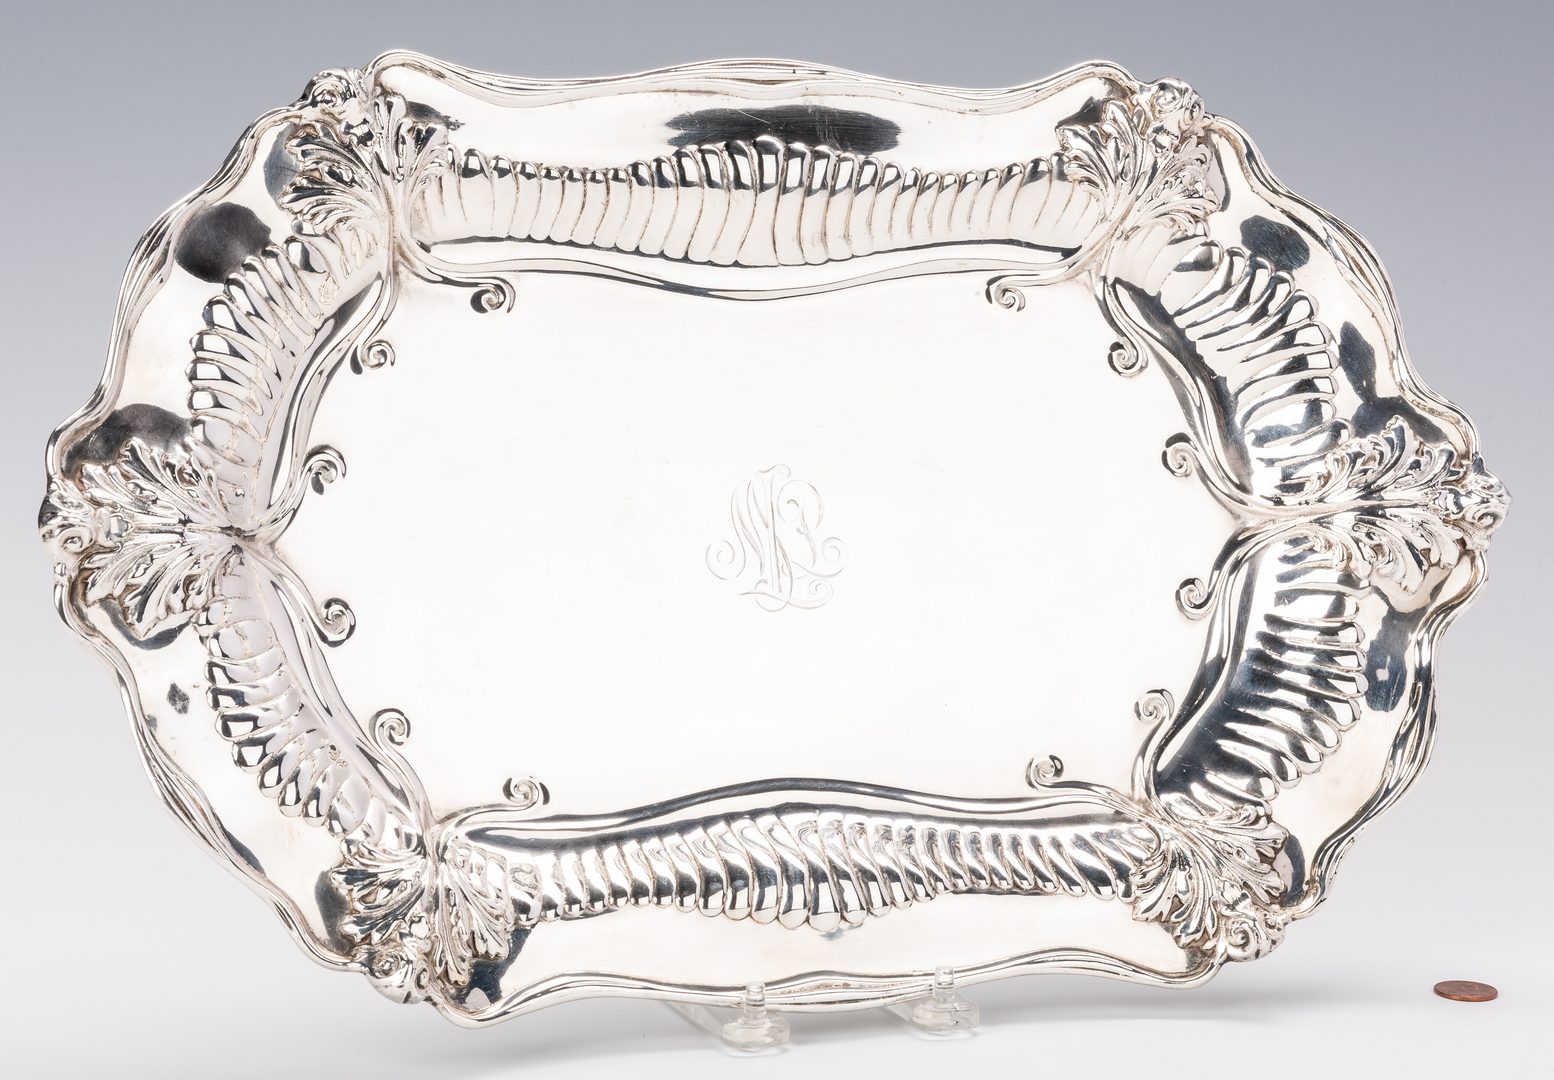 Lot 697: Dominick and Haff Sterling Tray